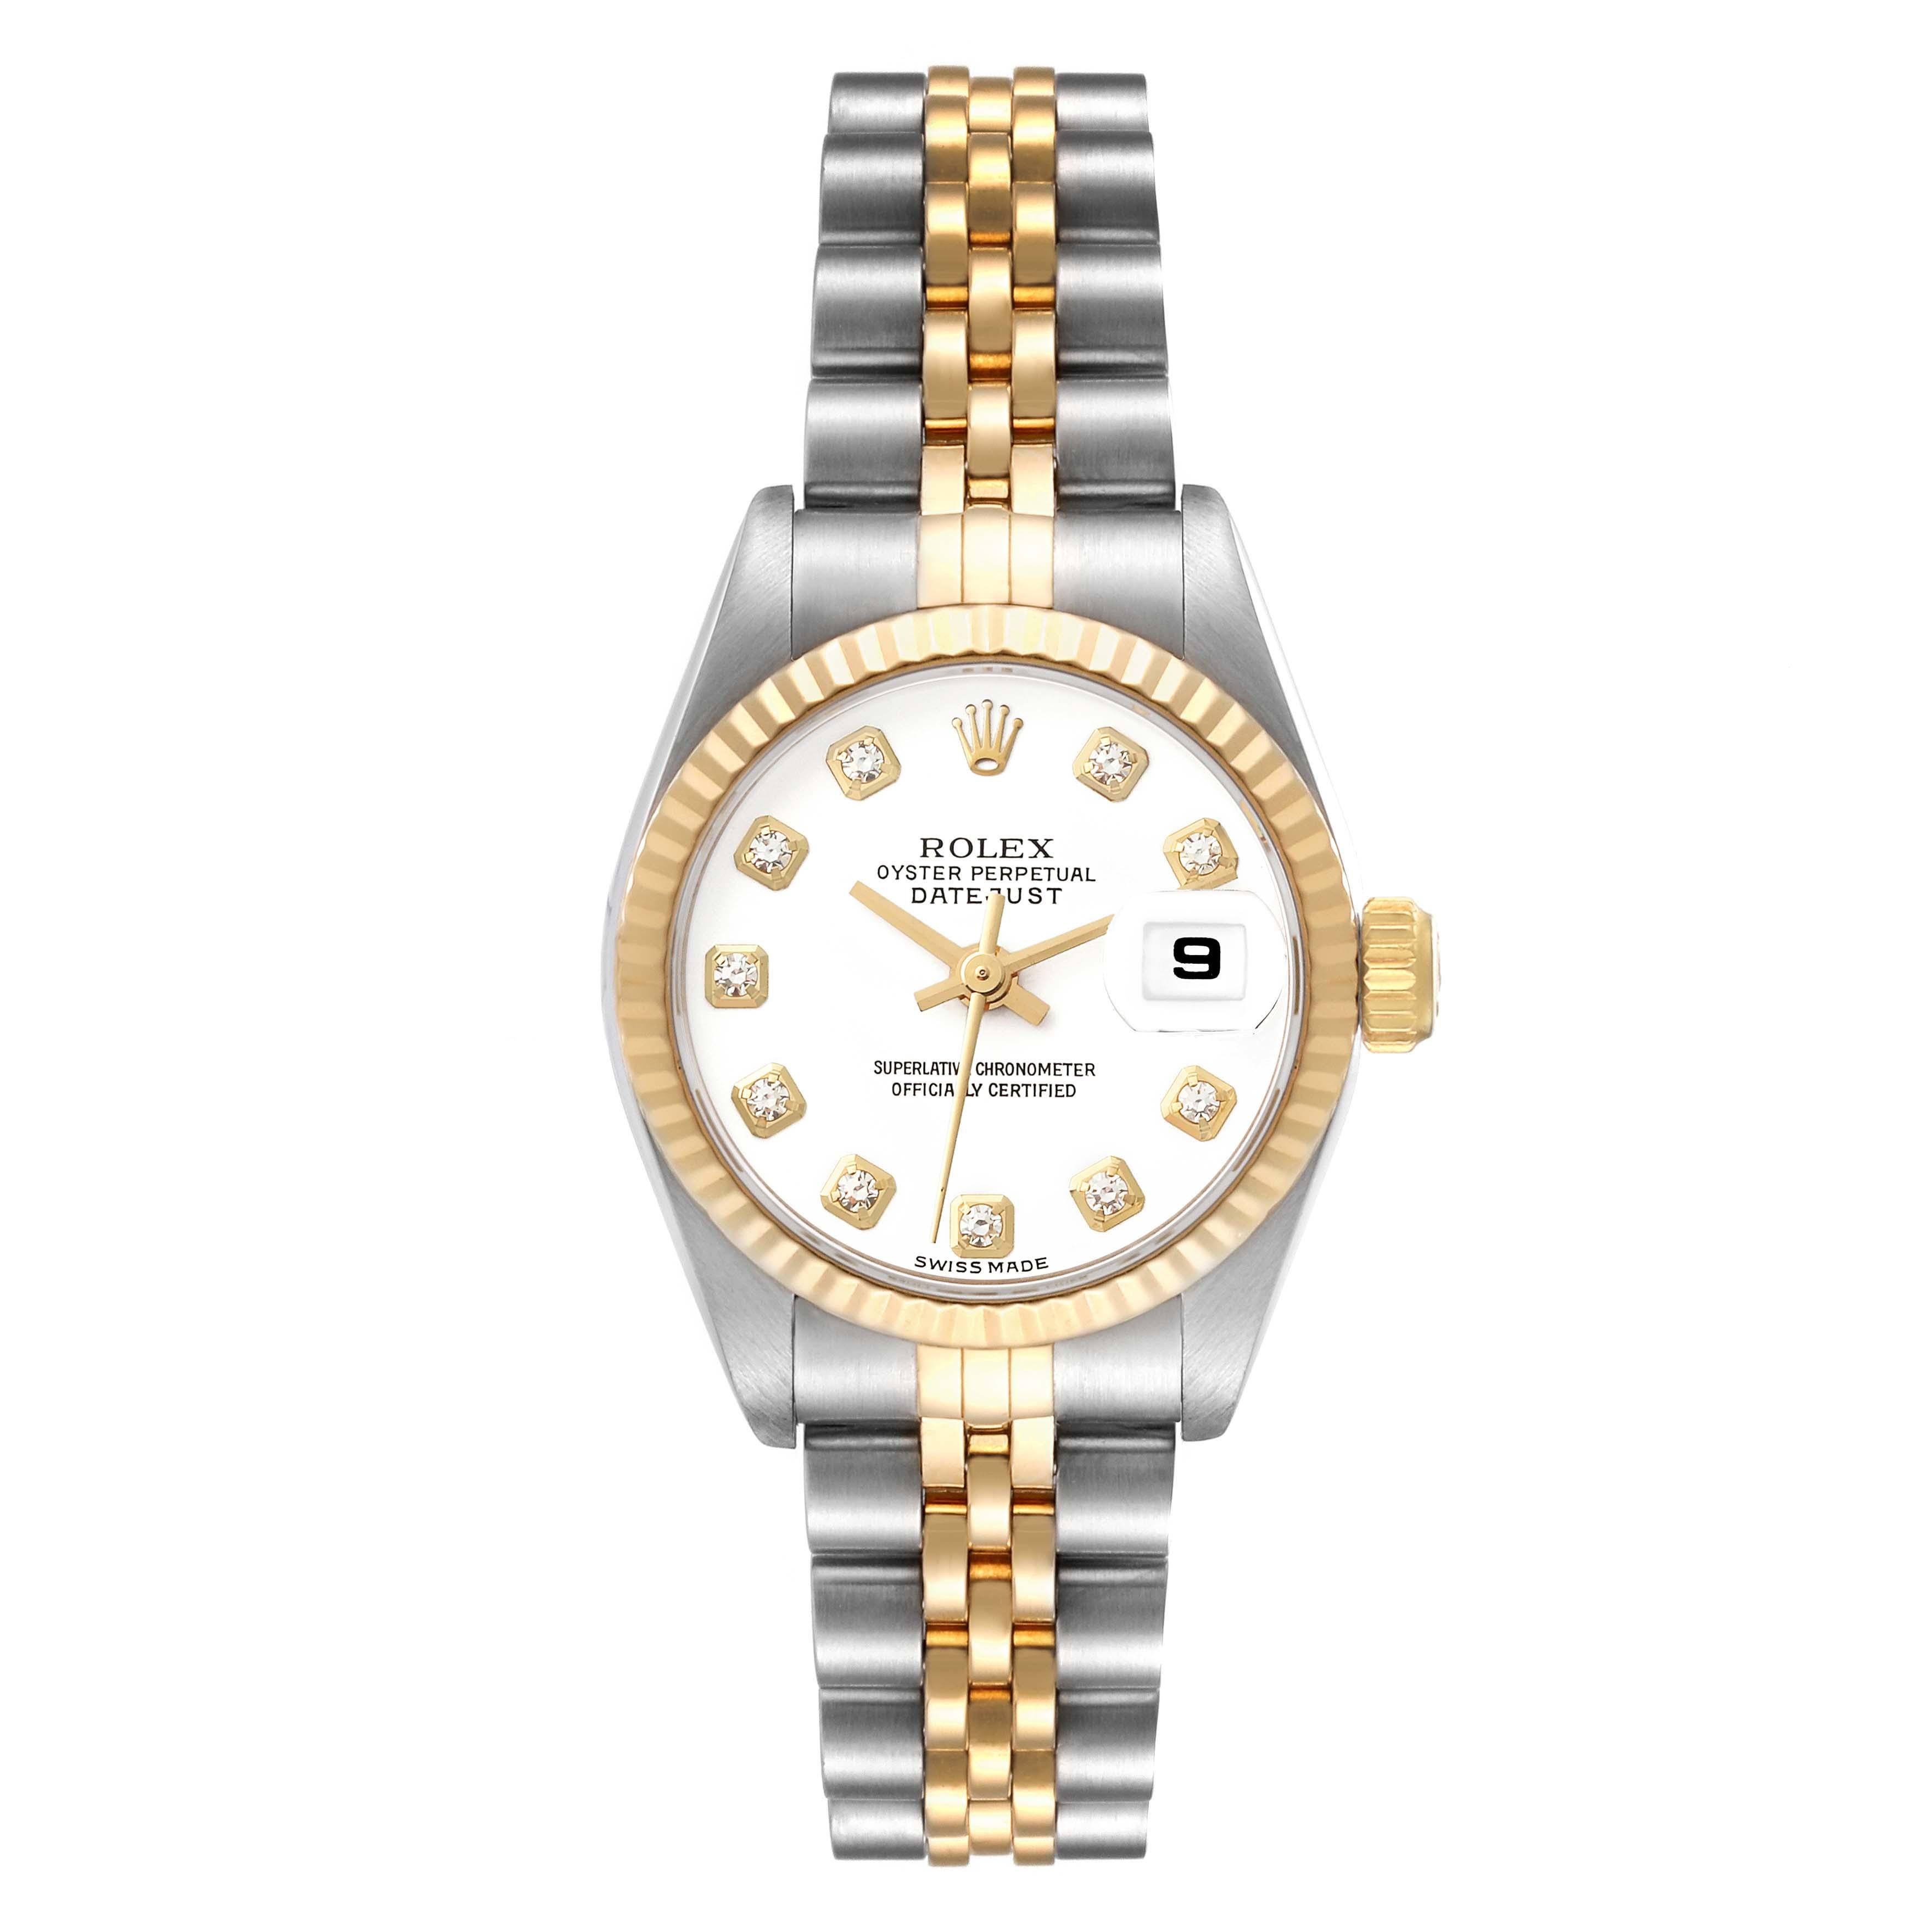 Rolex Datejust White Diamond Dial Steel Yellow Gold Ladies Watch 69173. Officially certified chronometer automatic self-winding movement. Stainless steel oyster case 26.0 mm in diameter. Rolex logo on the crown. 18k yellow gold fluted bezel. Scratch